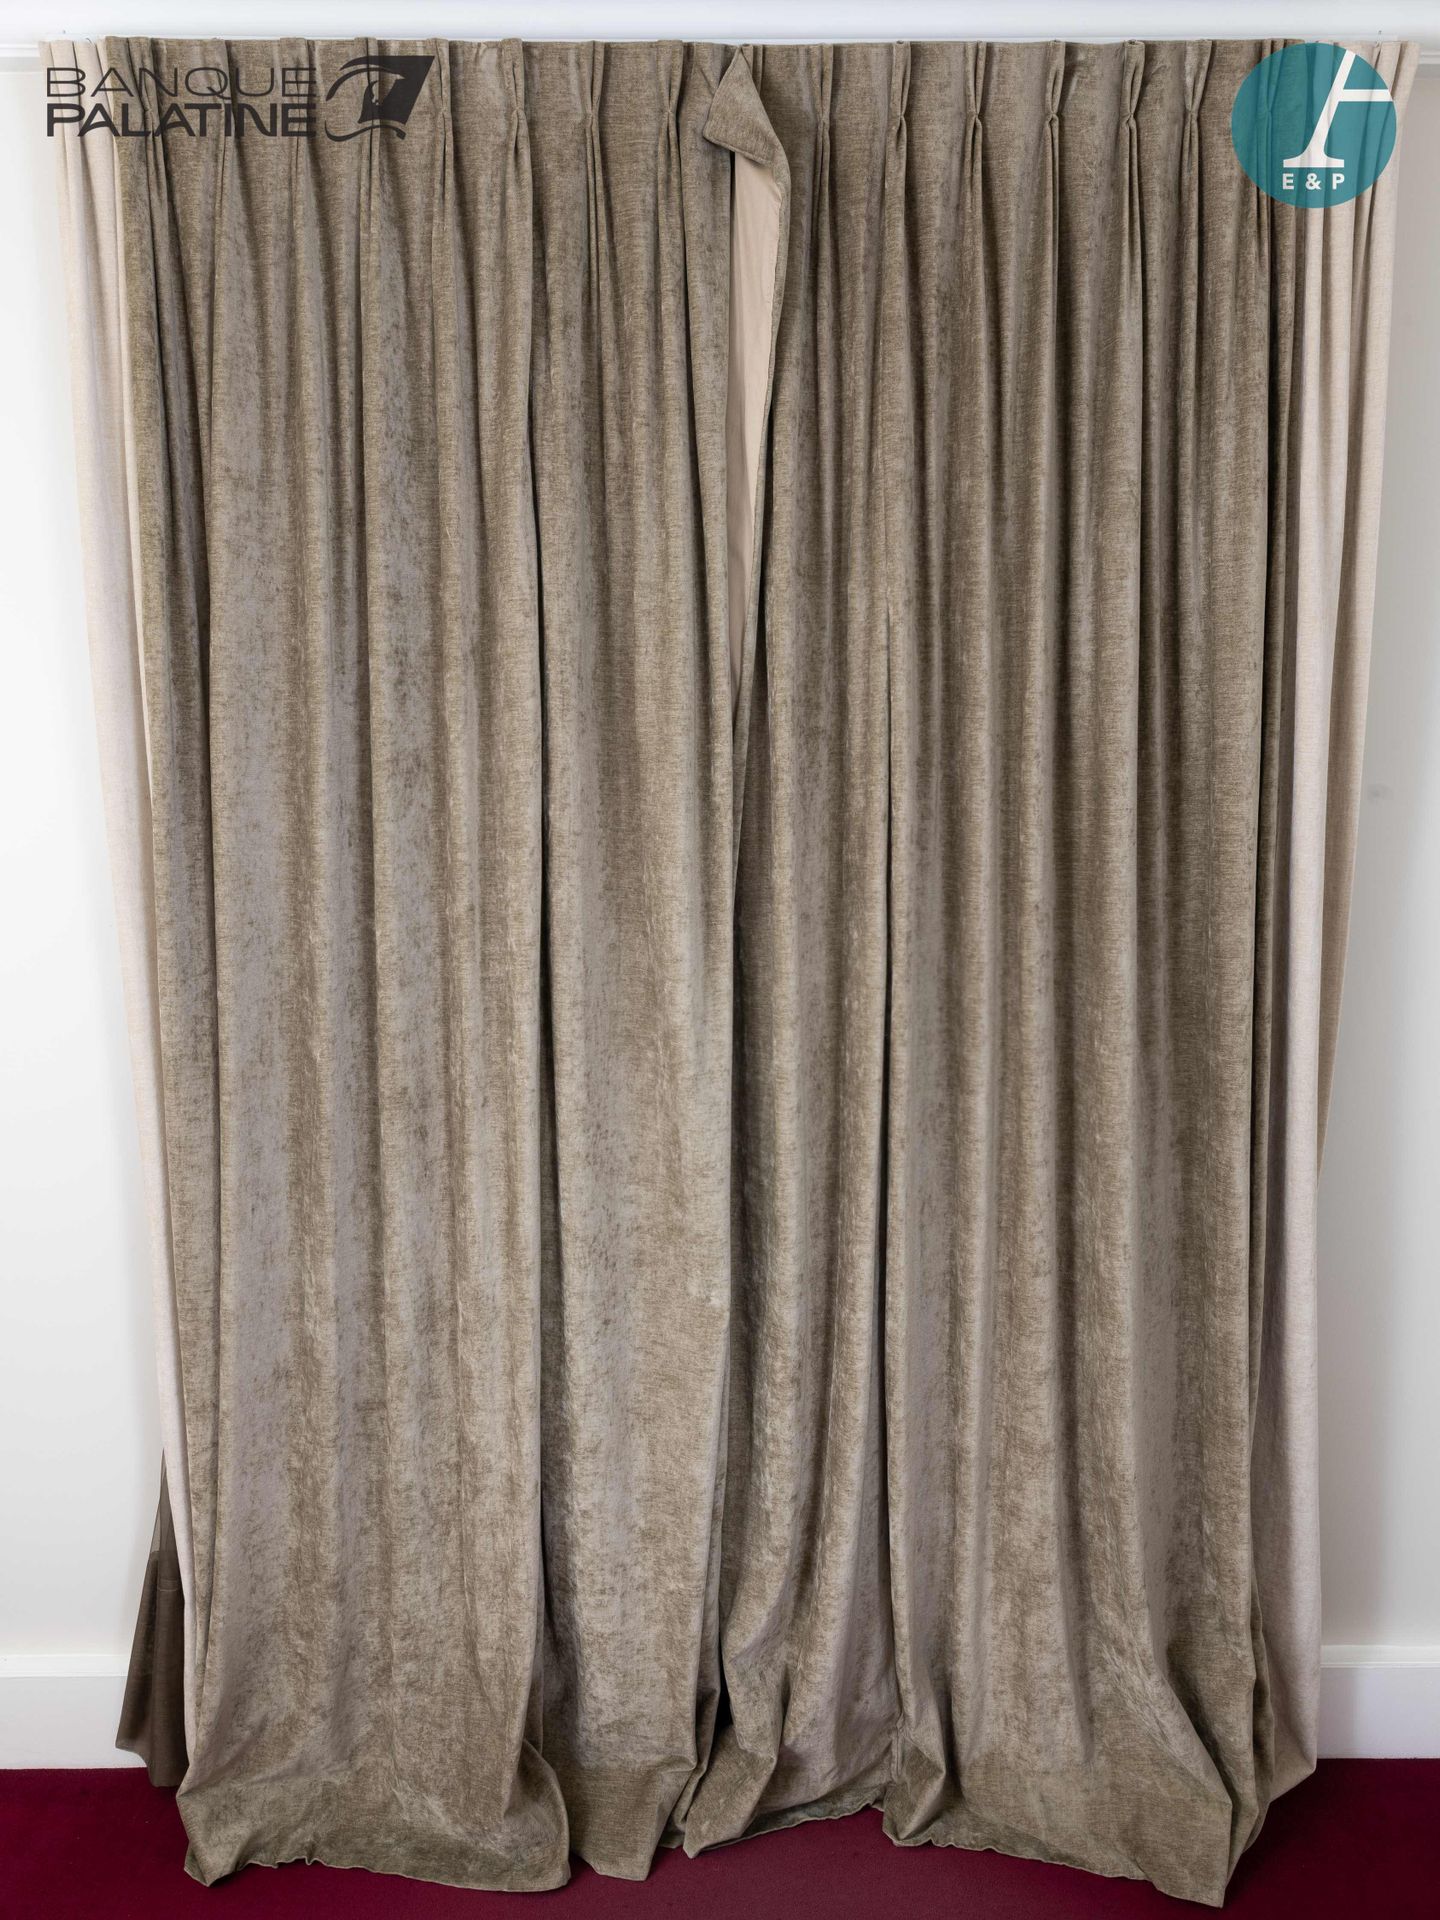 Null A pair of large grey and beige curtains.

H : approx 3,10 m

L : 1,10m (1 p&hellip;